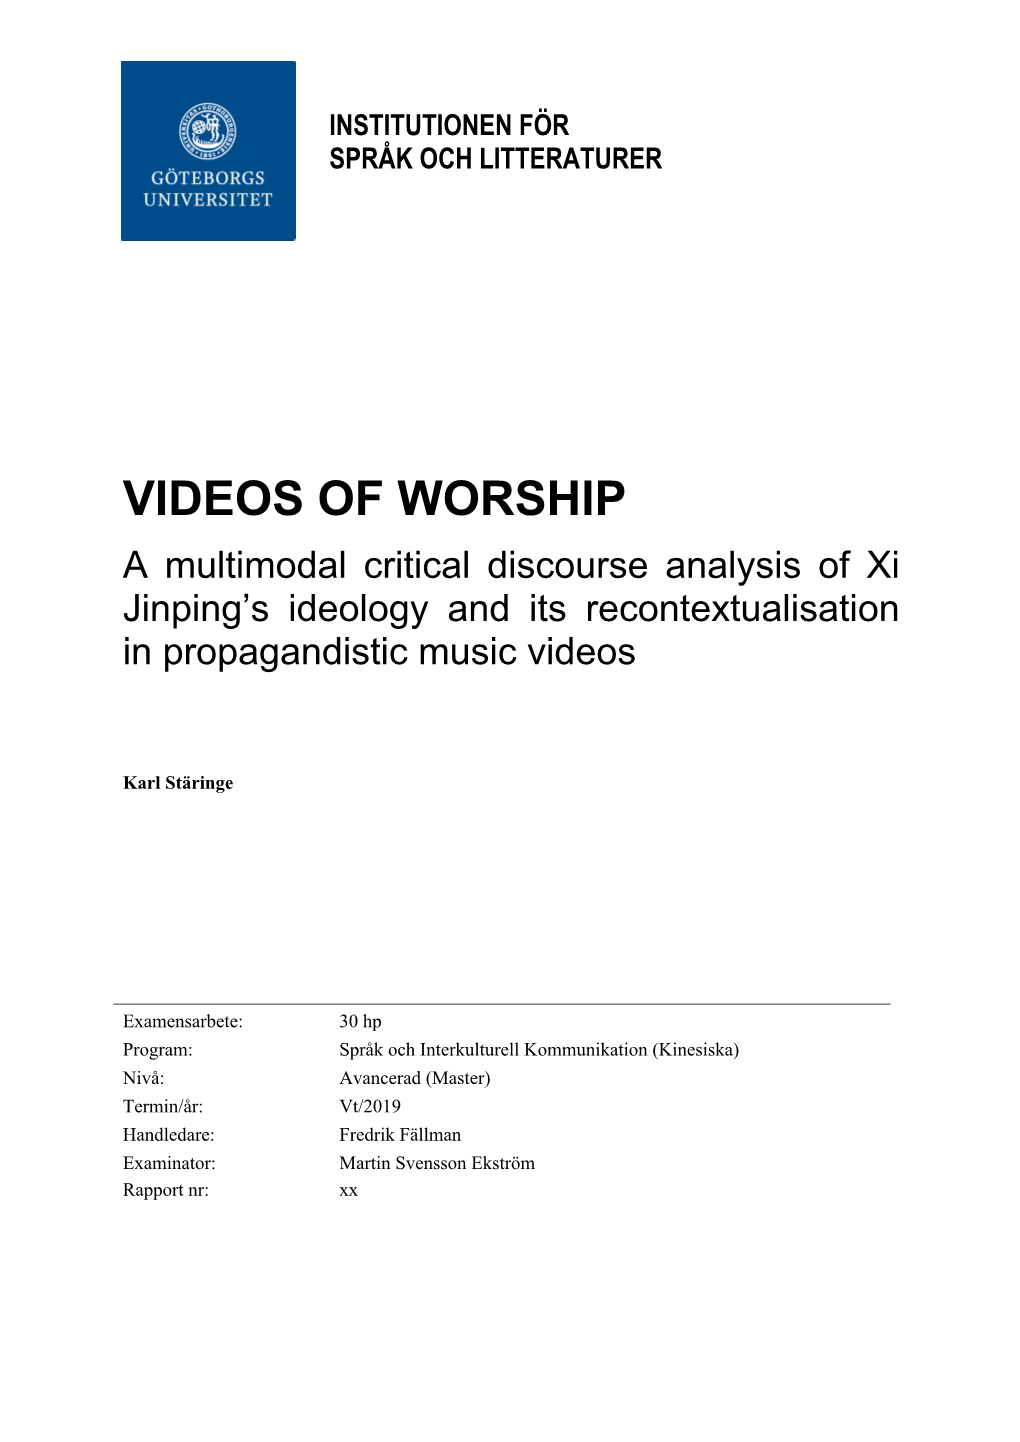 VIDEOS of WORSHIP a Multimodal Critical Discourse Analysis of Xi Jinping’S Ideology and Its Recontextualisation in Propagandistic Music Videos